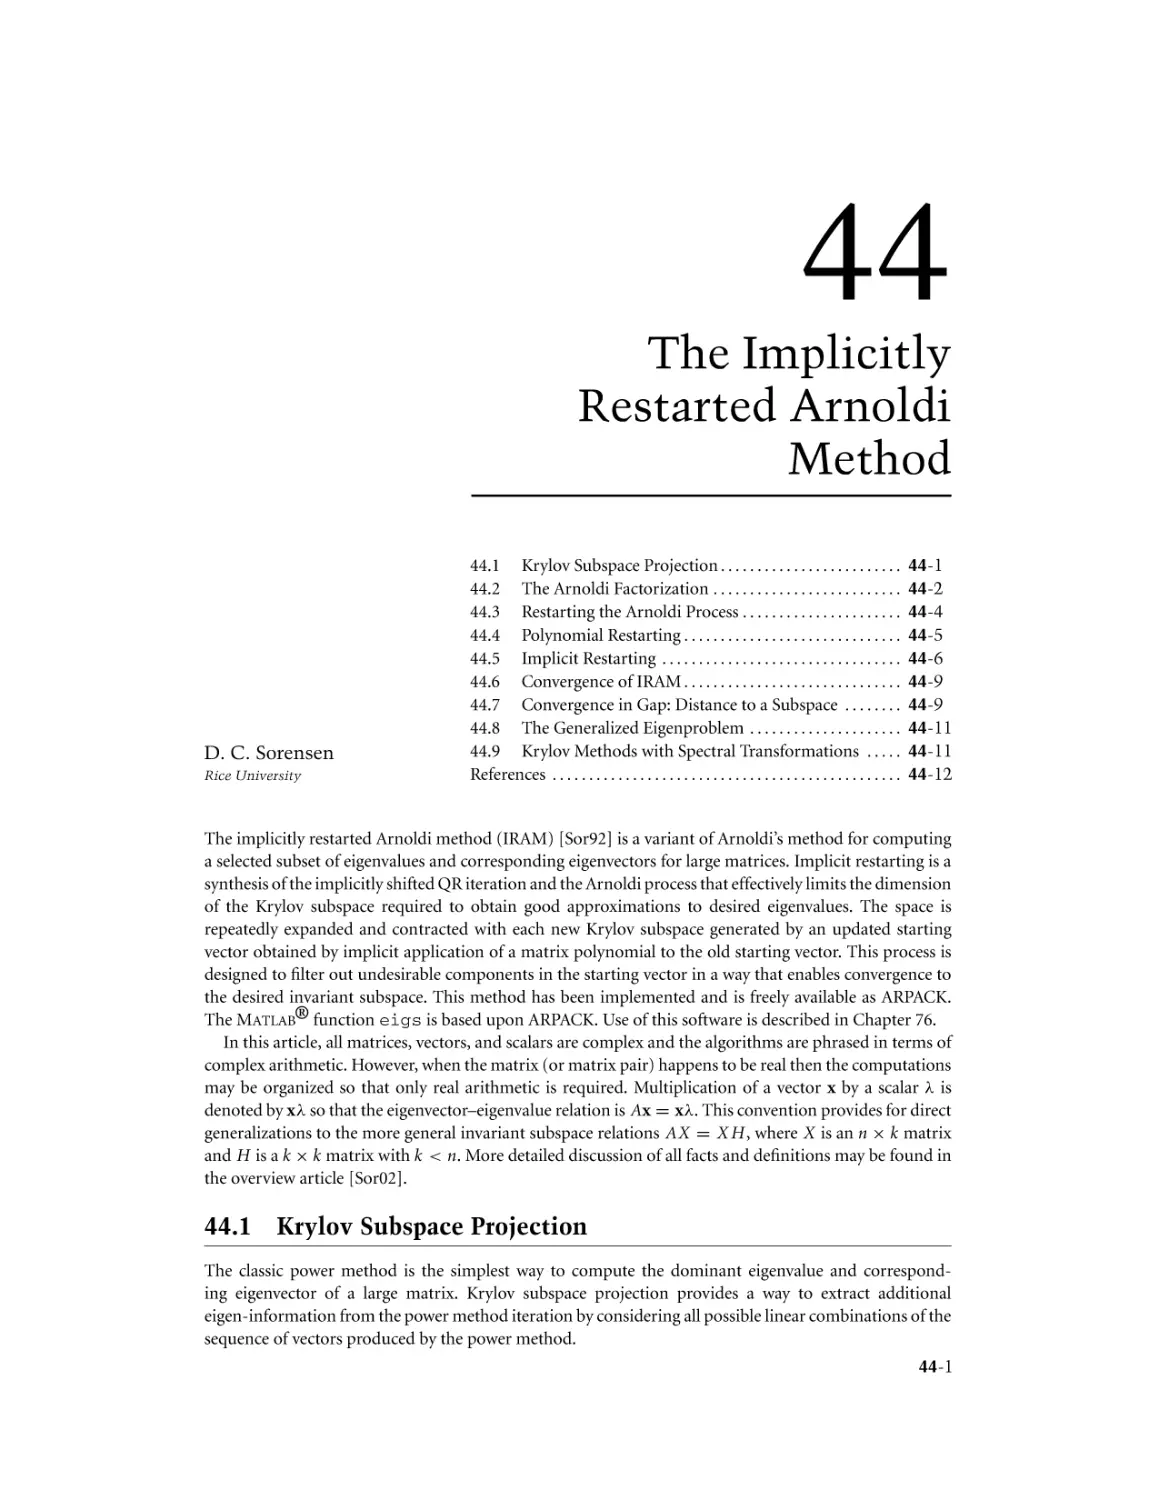 Chapter 44. The Implicitly Restarted Arnoldi Methods